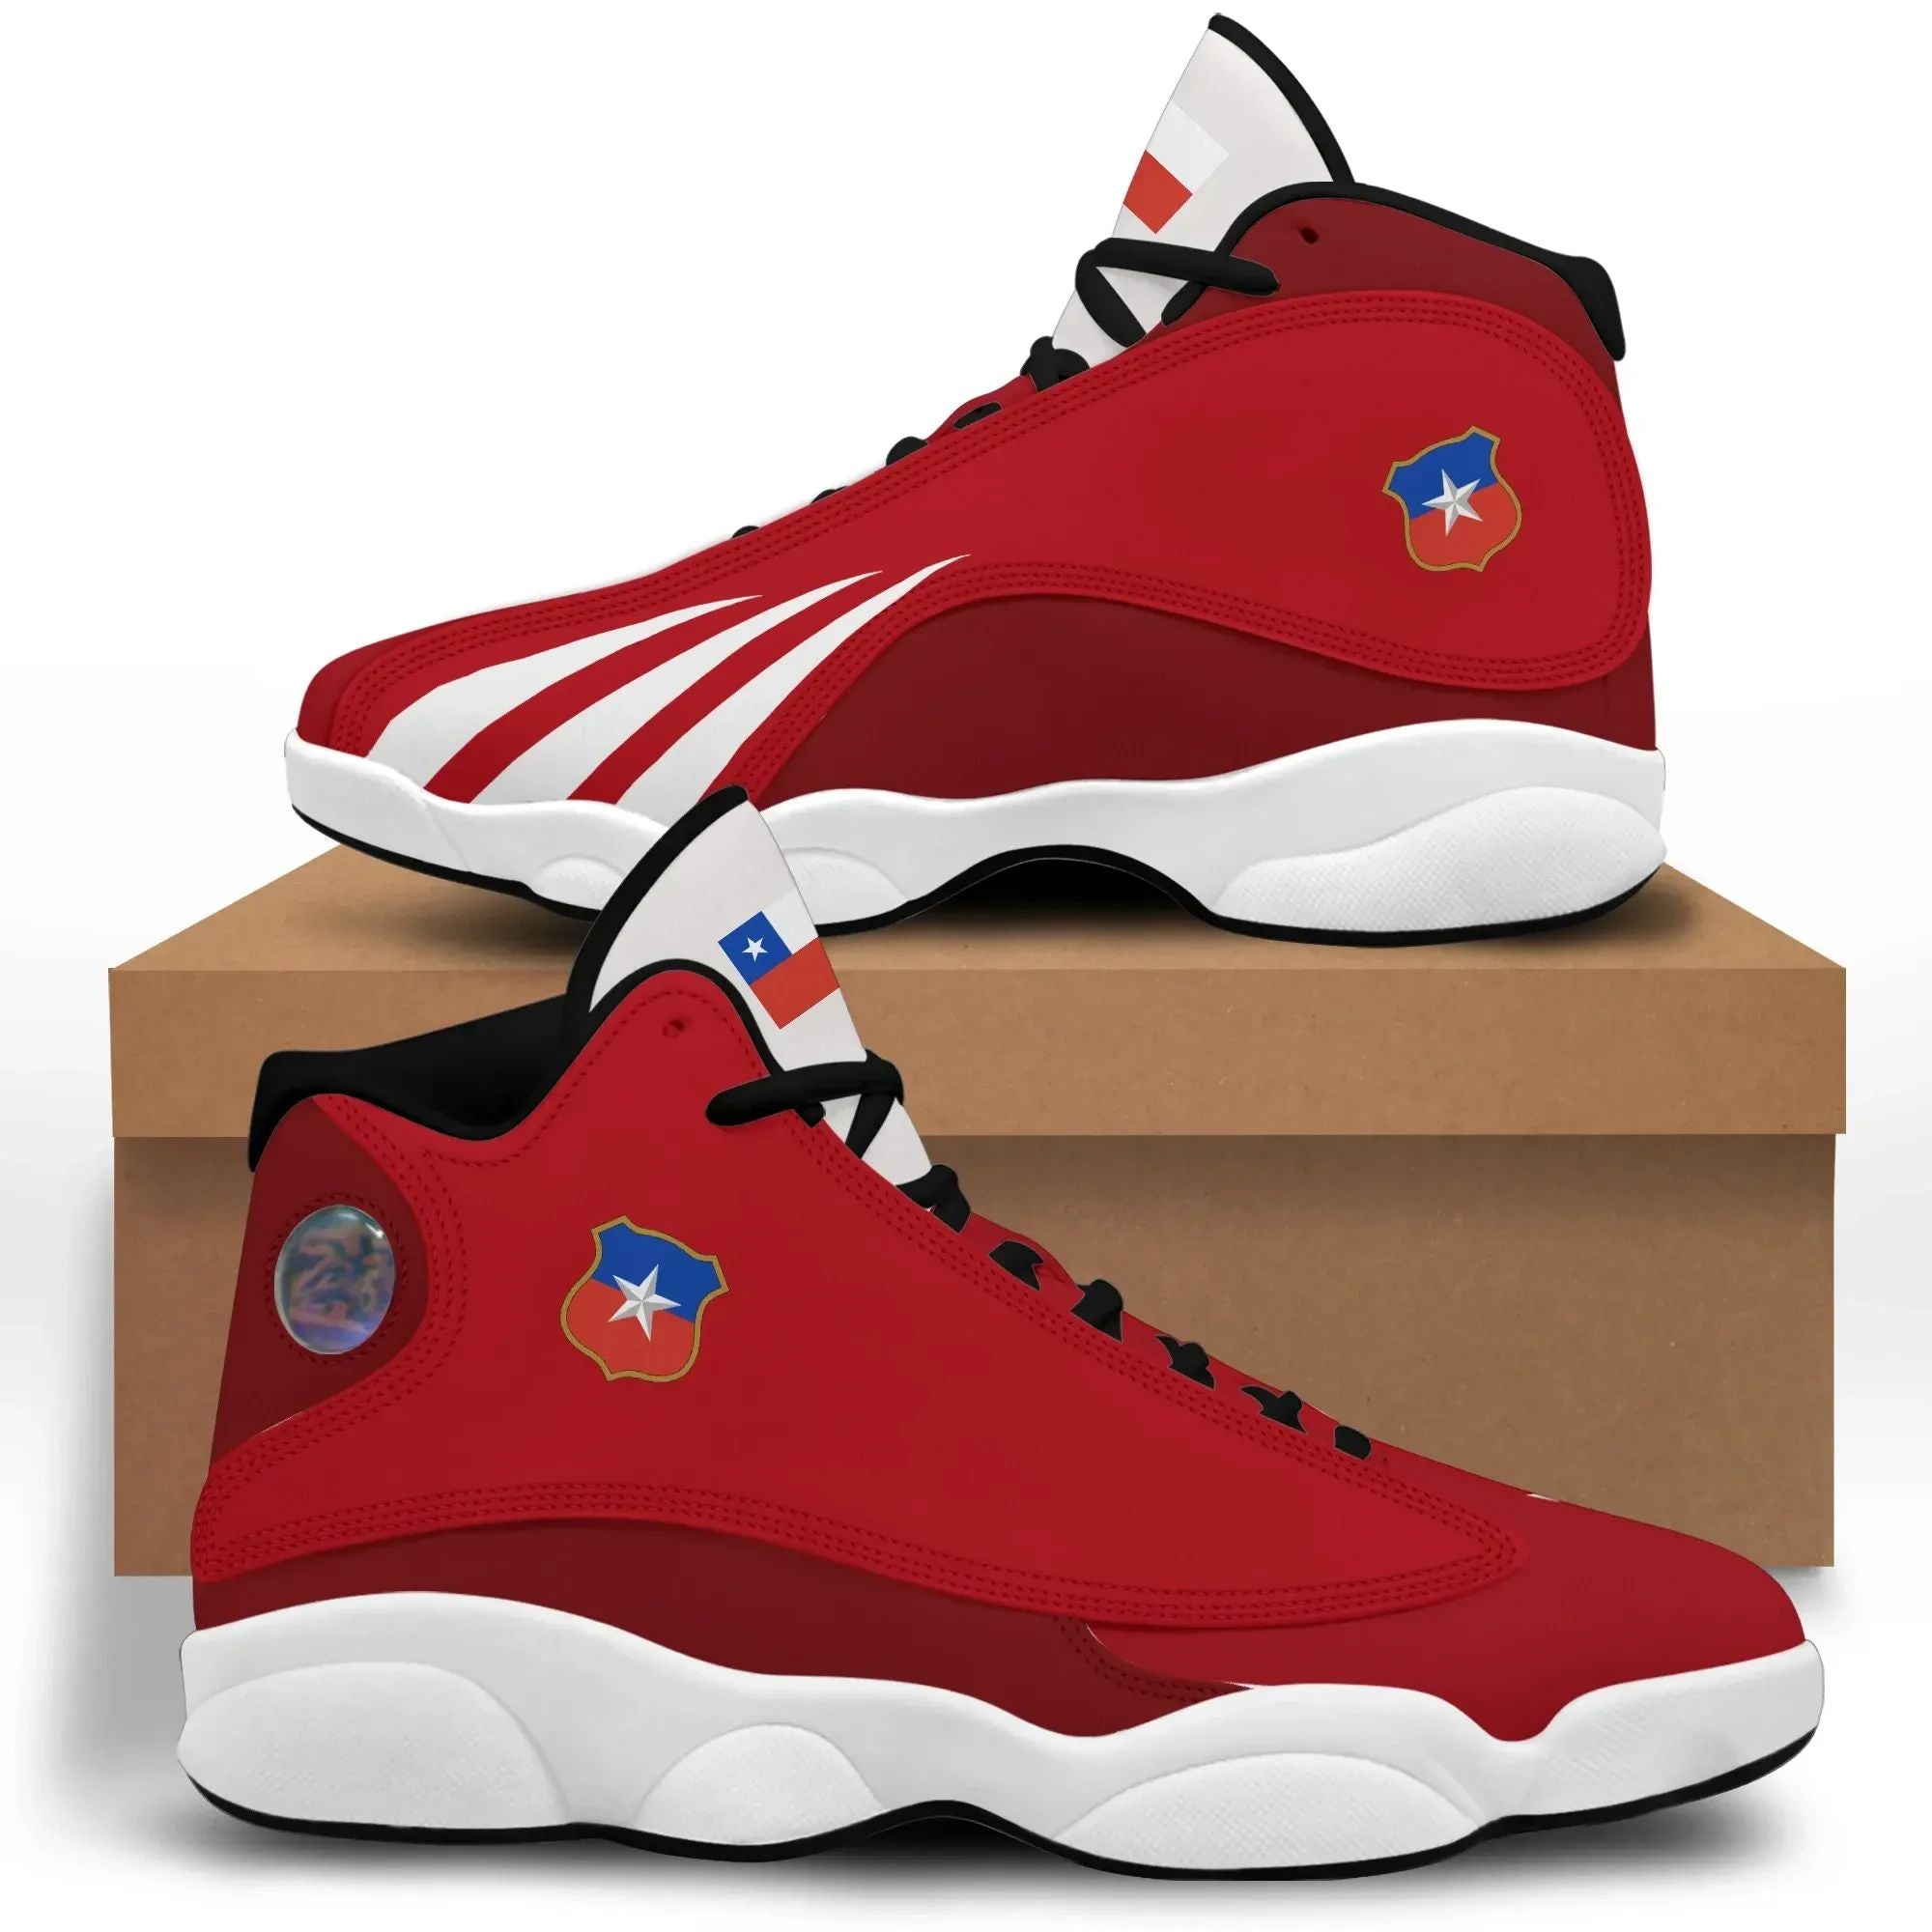 chile-flag-high-top-sneakers-shoes-womensmens